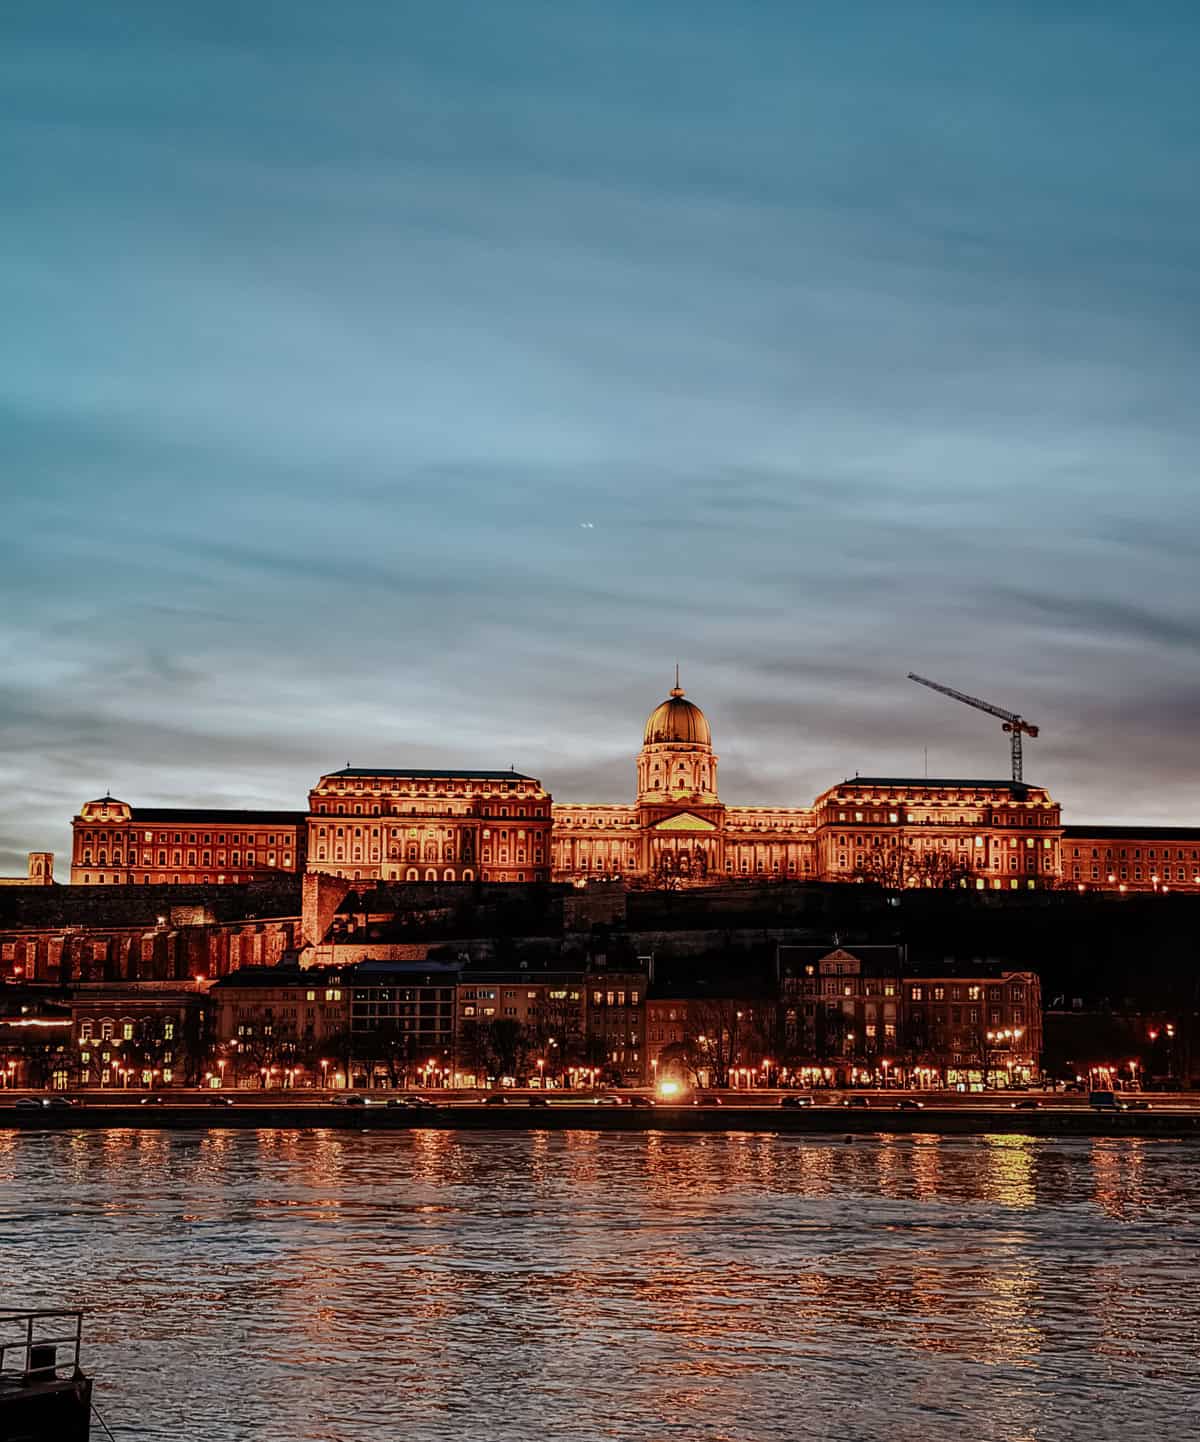 The Buda Castle in Budapest lit up beautifully at night, with its reflection shimmering on the Danube River.